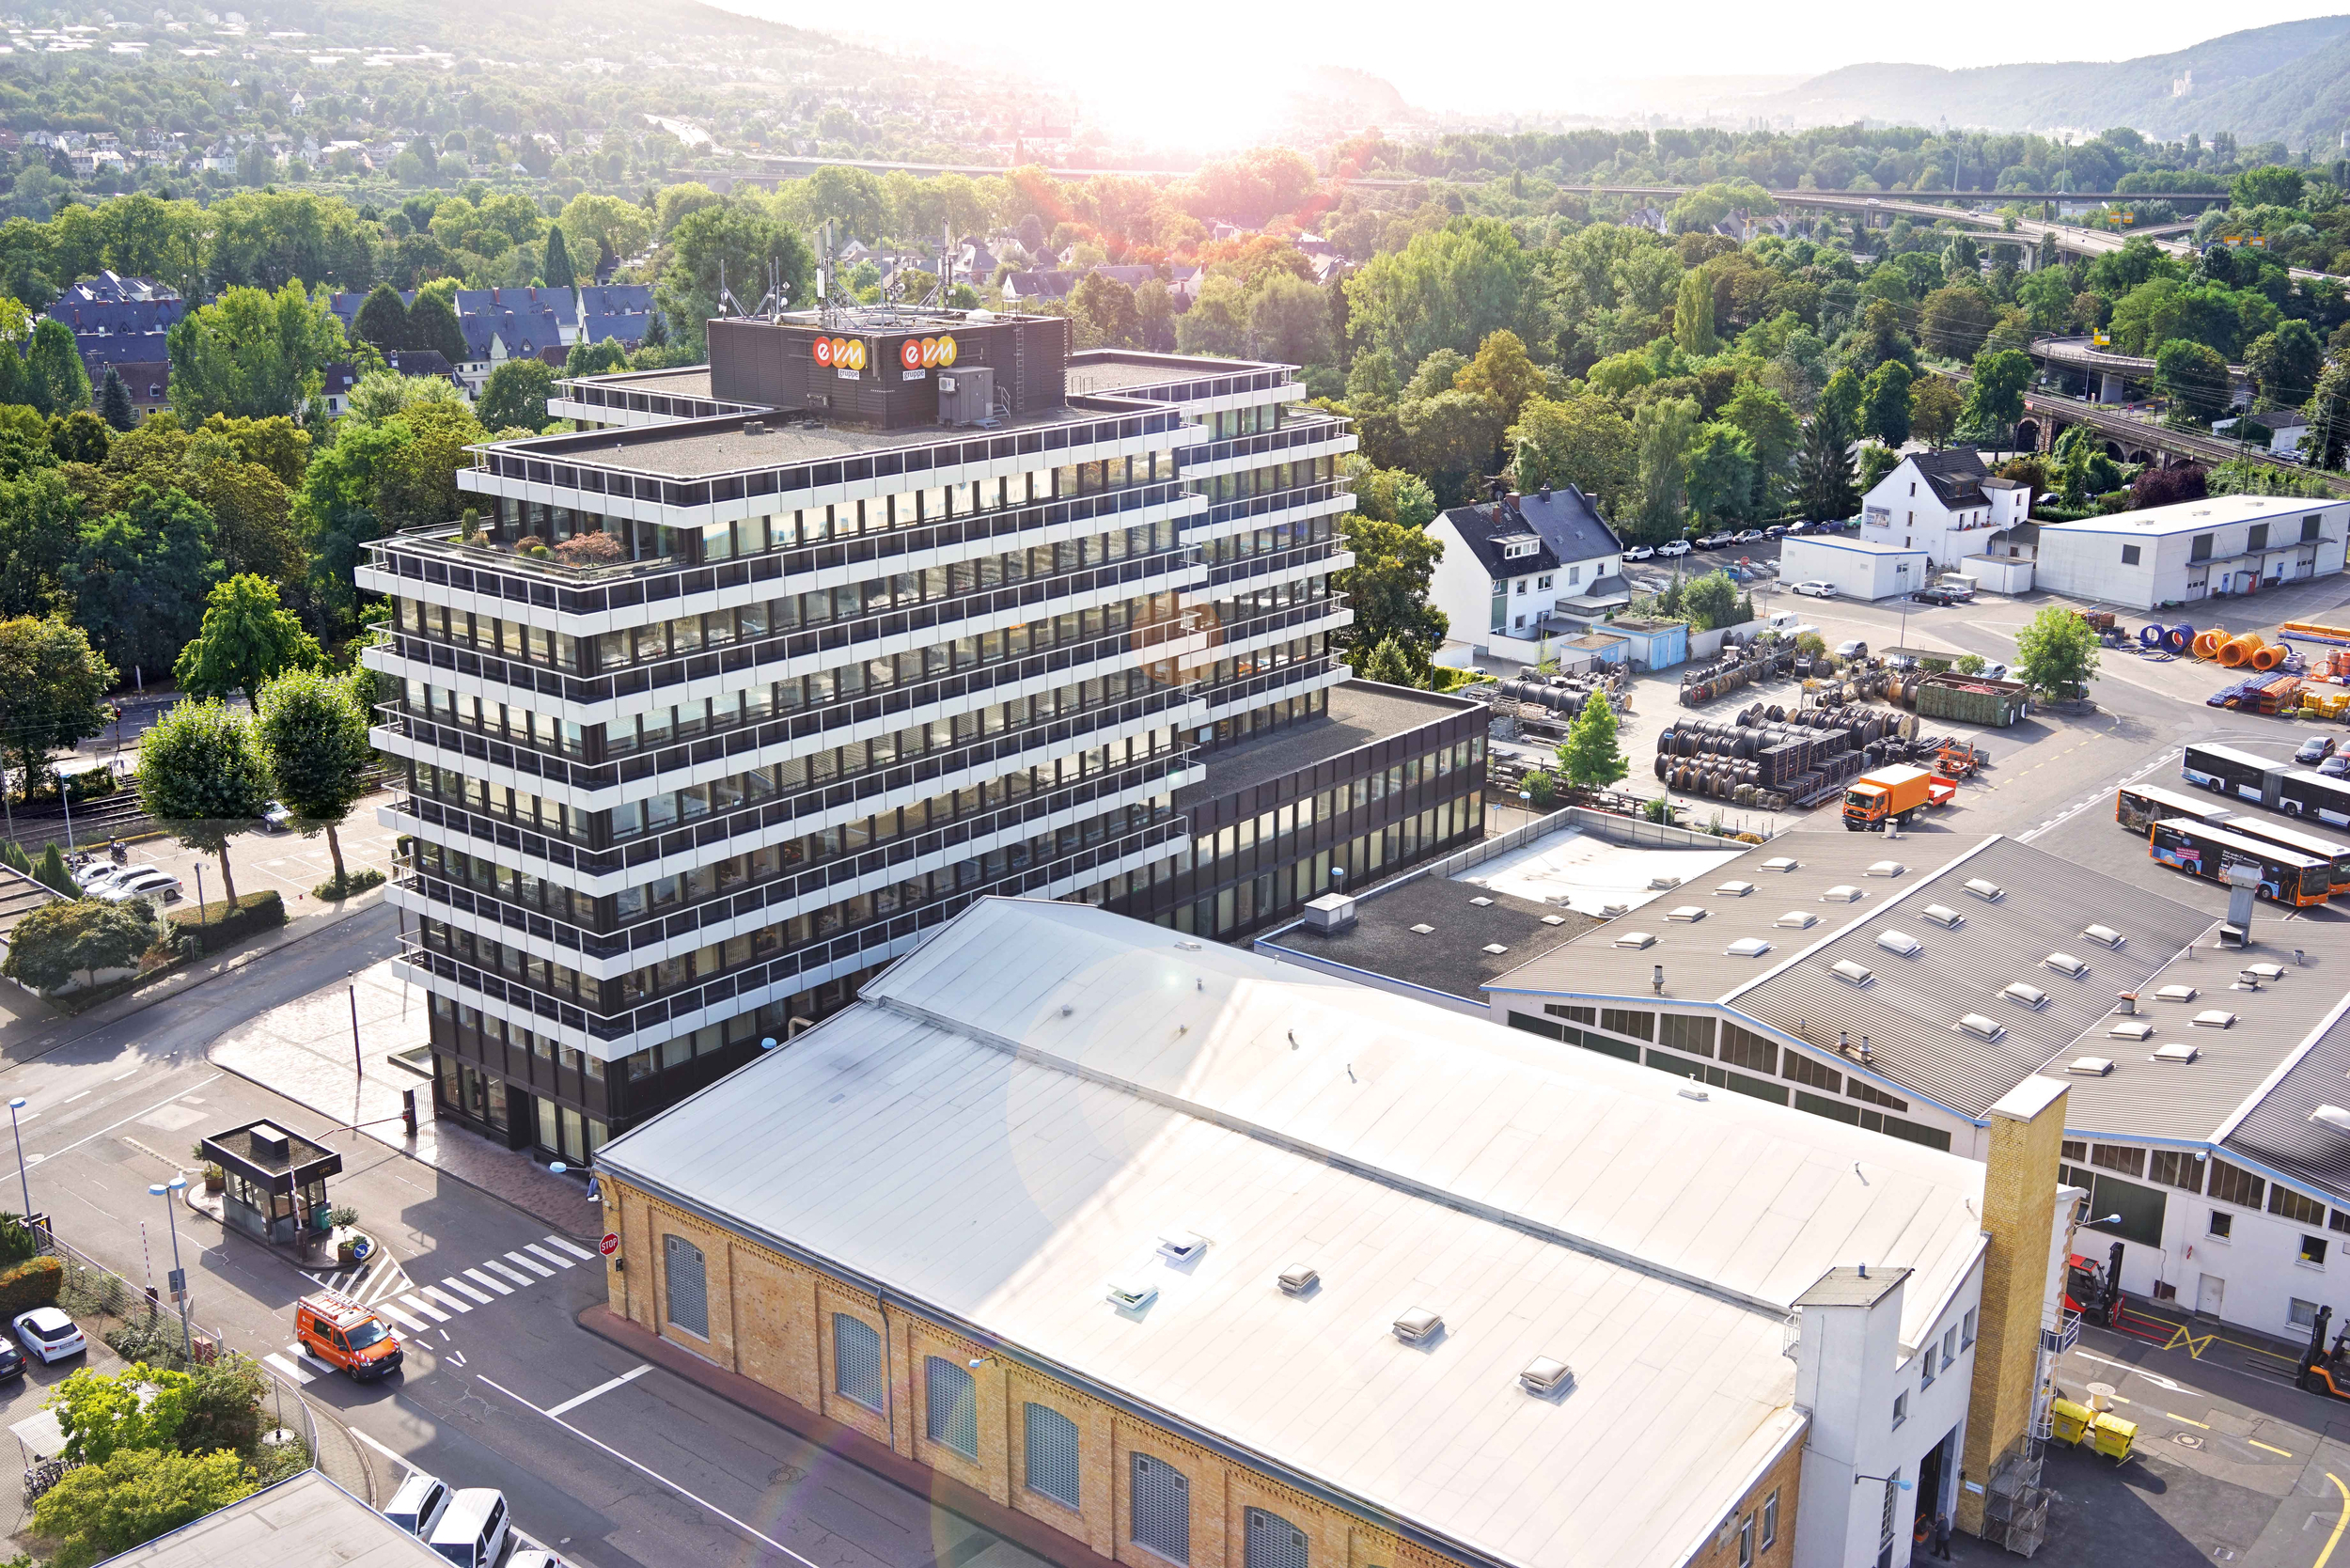 Kentix convinces Energieversorgung Mittelrhein (evm): Effortless scalability from wall cabinets to large sites – security and quality thanks to ISO 27001 and Kentix technology